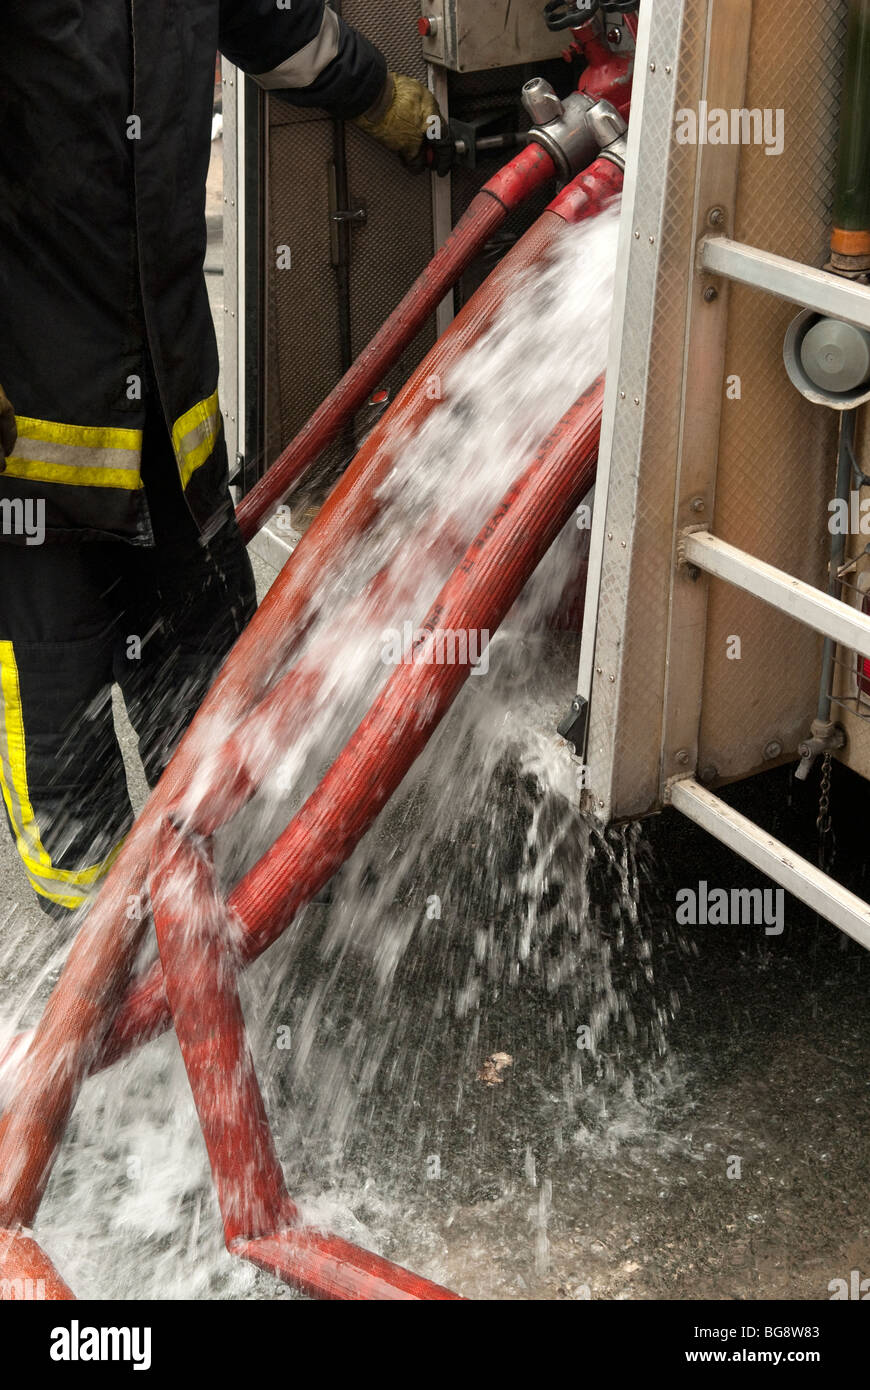 Water gushing from fire hose at fire engine FULLY MODEL RELEASED Stock Photo